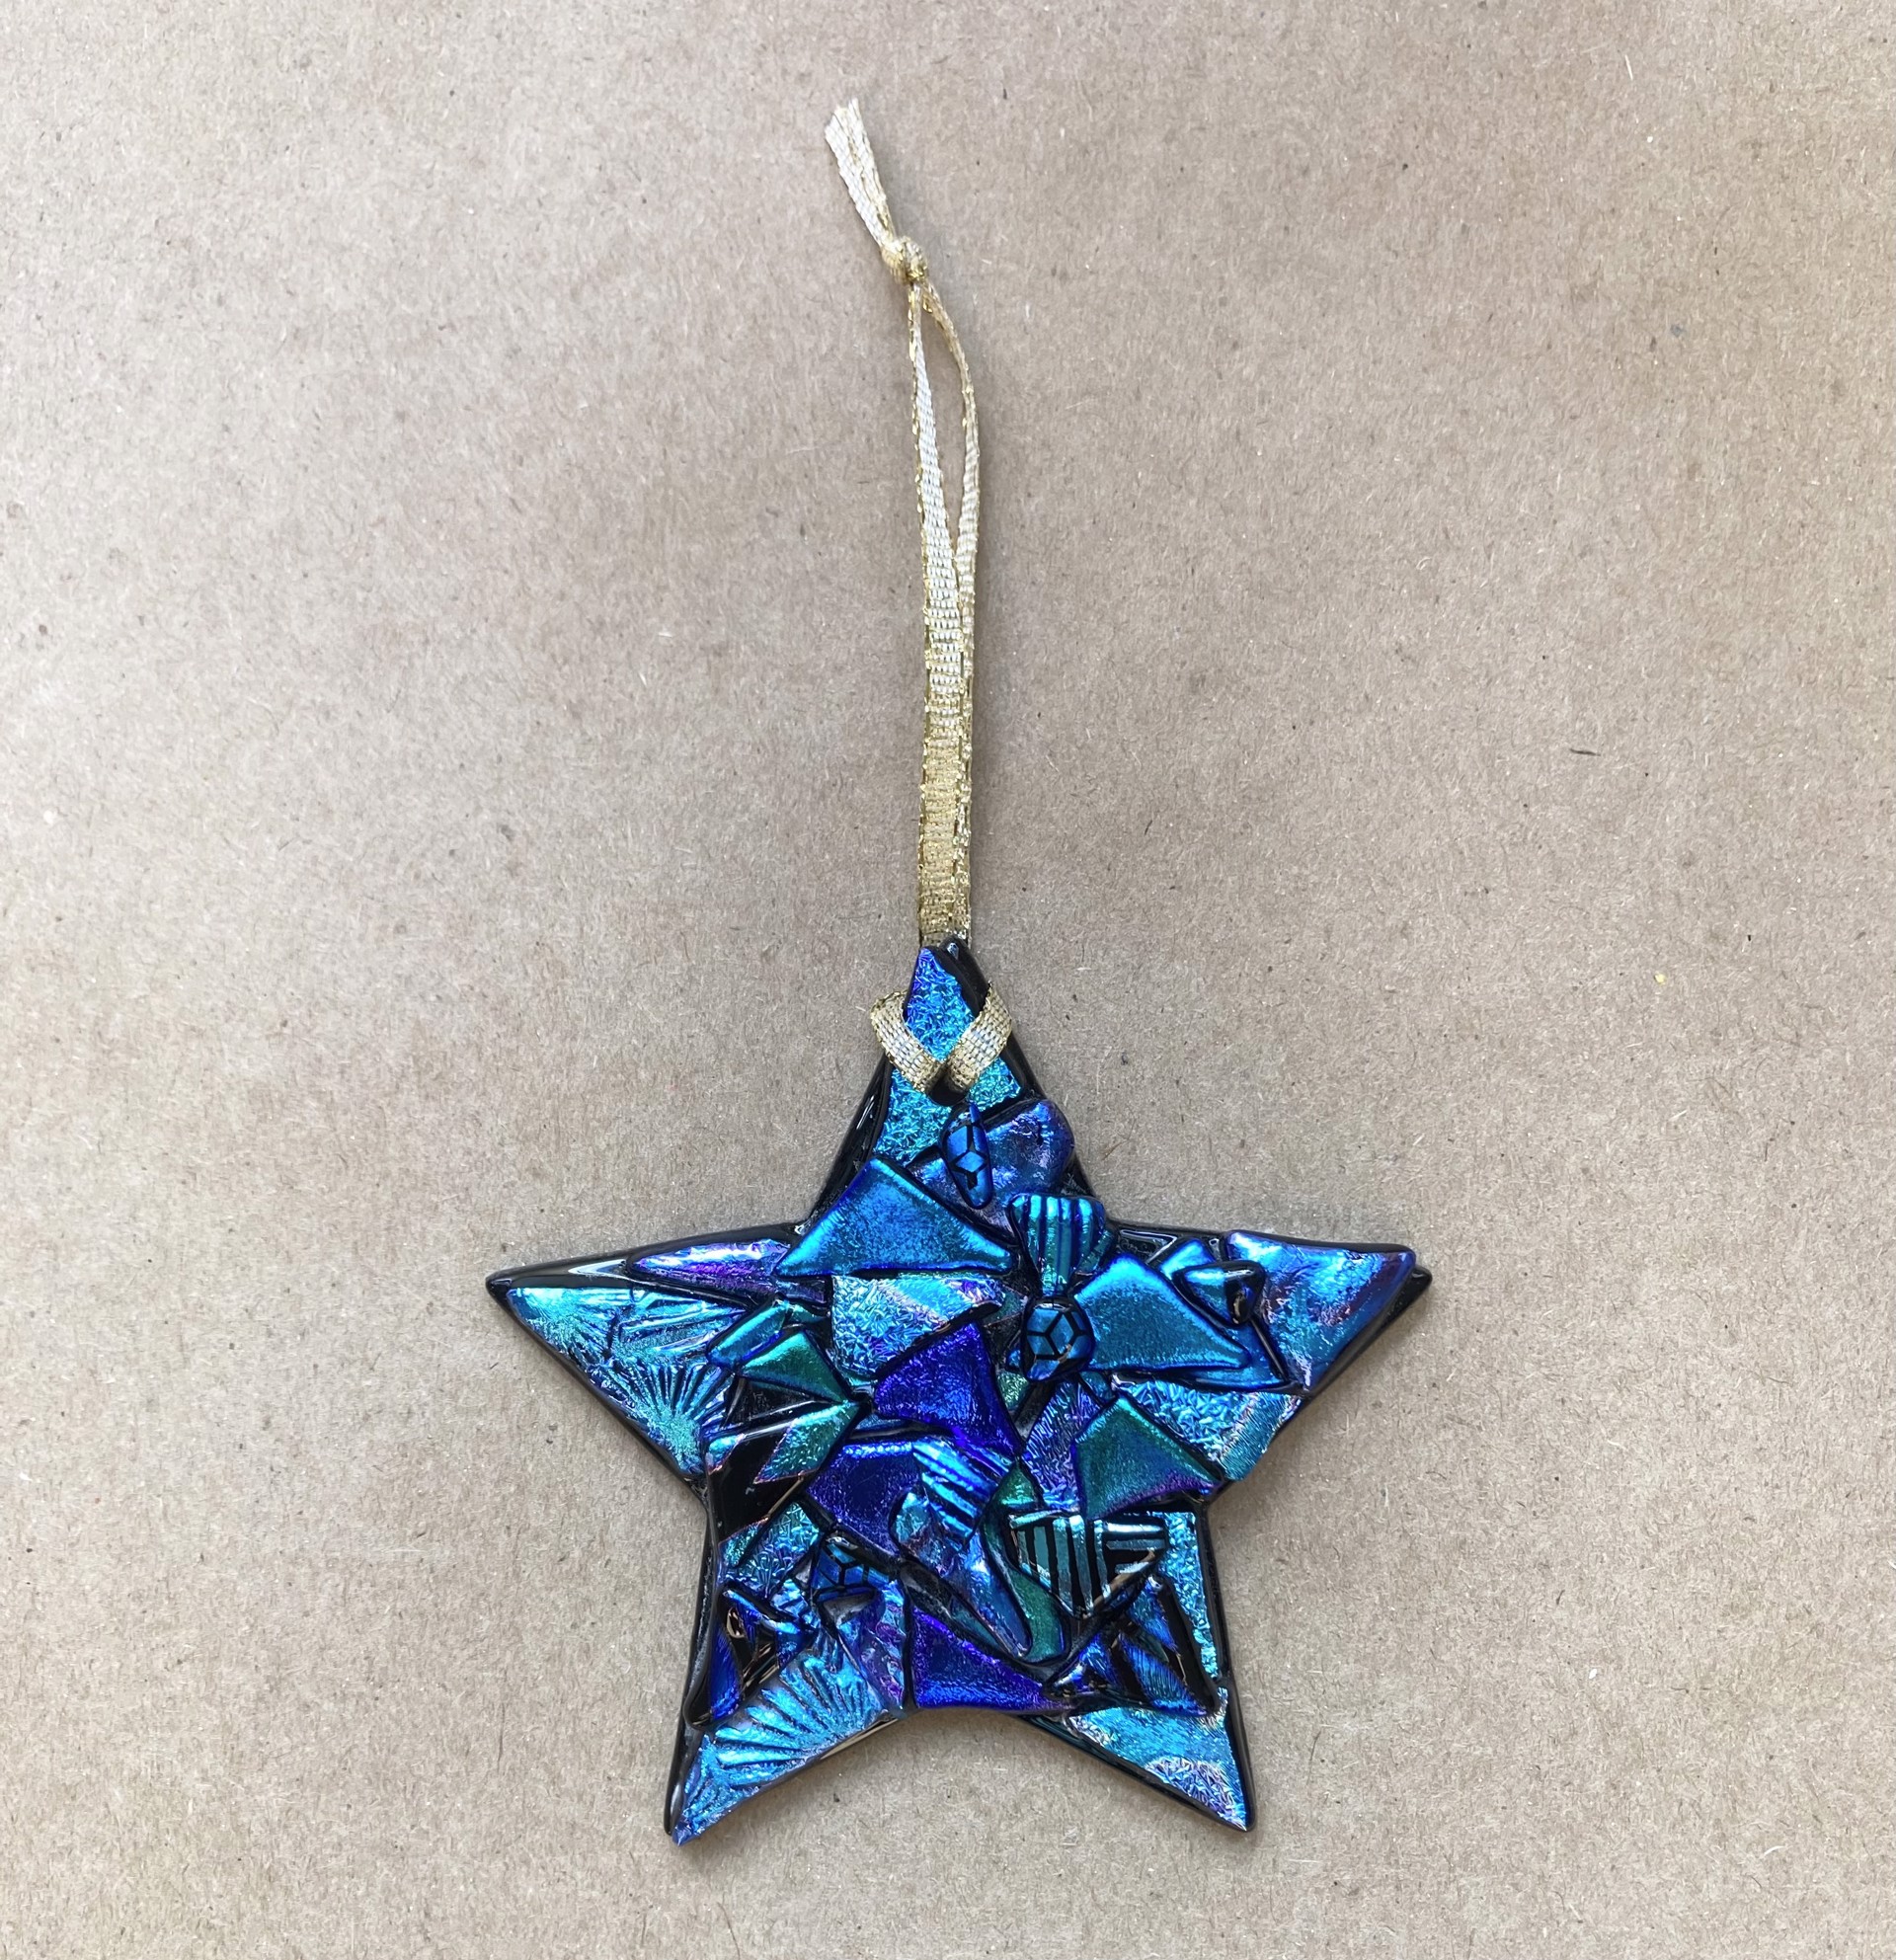 Blue Star Ornament by Doug and Barbara Henderson